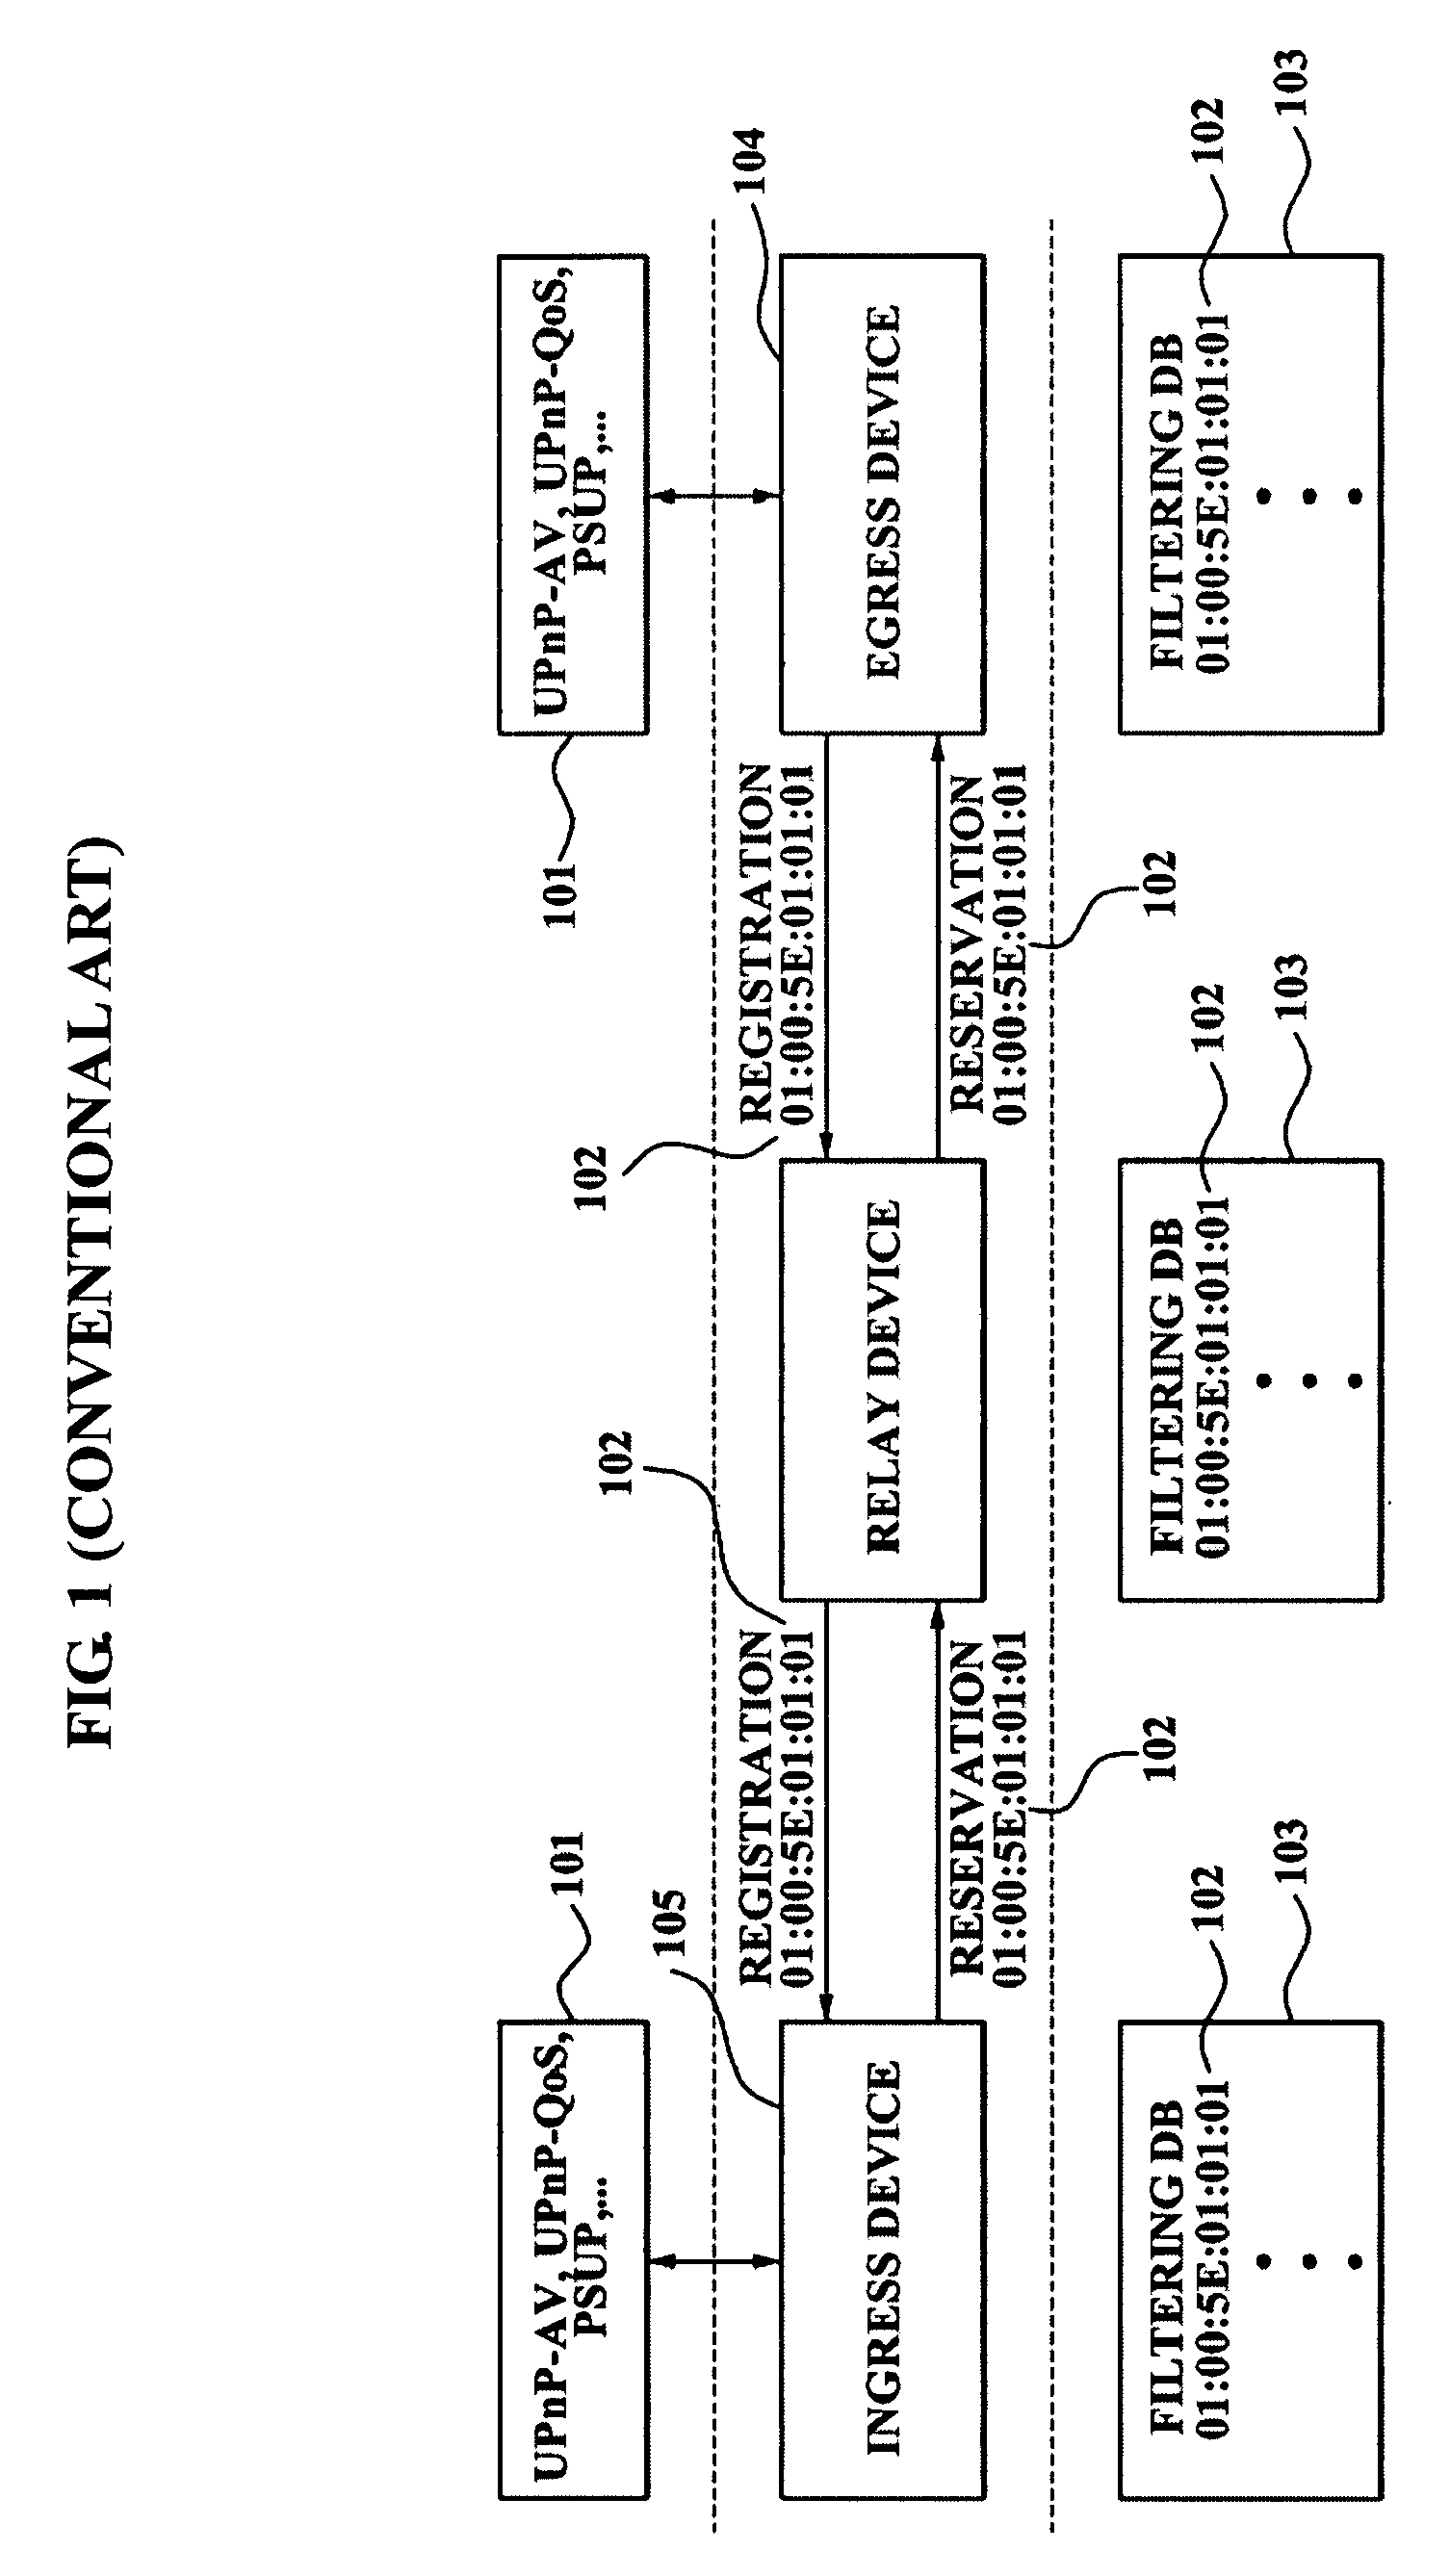 Extension of audio/video bridging reservation protocol